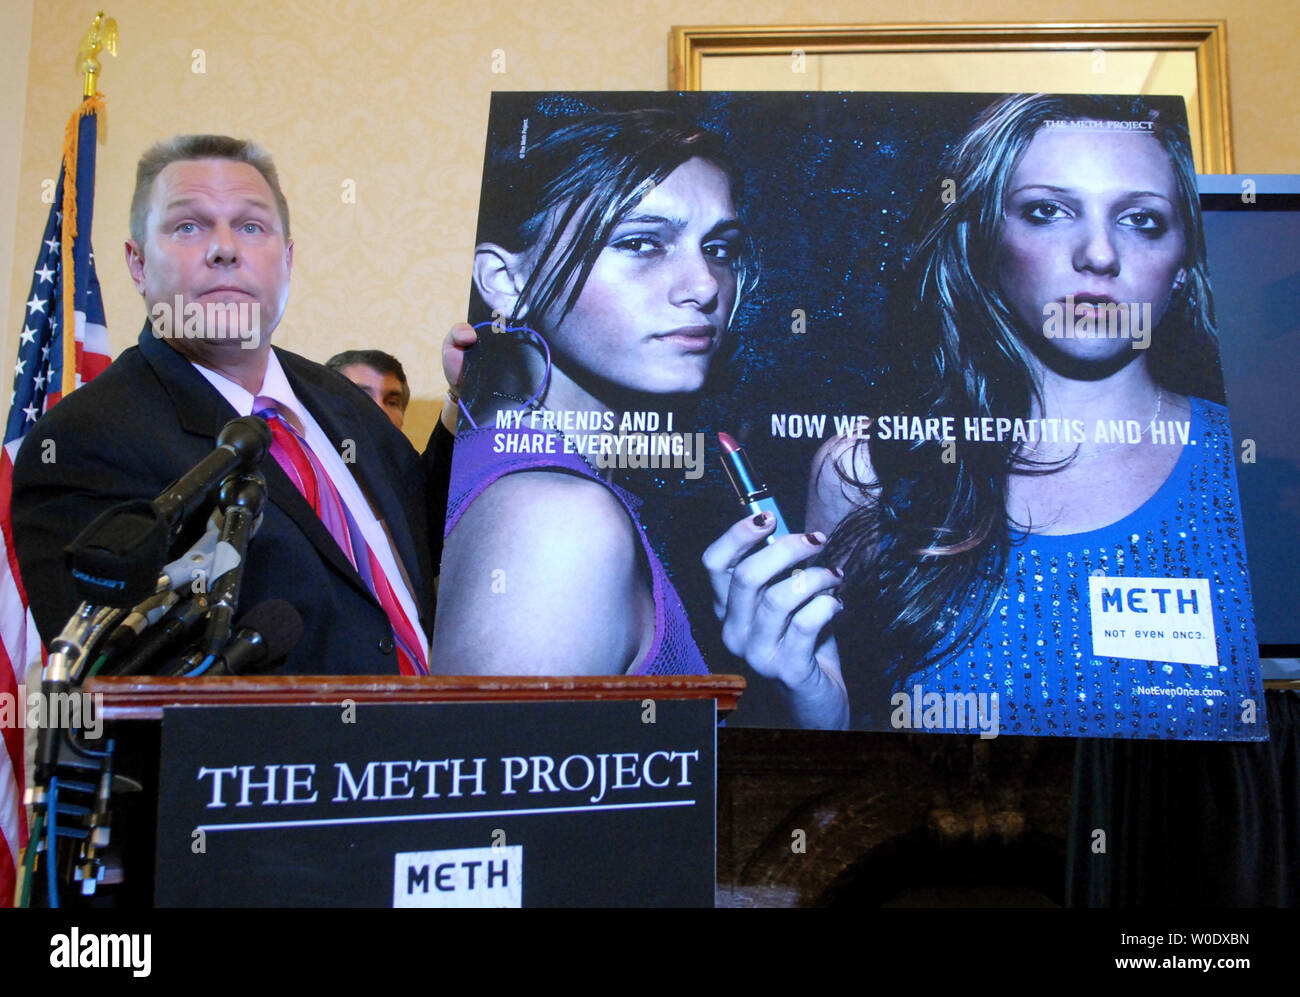 Sen. Jon Tester (D-MT) holds up an example of a public service announcement introduced in Montana by The Meth Project aimed at curbing methamphetamine use at a news conference to discuss the findings of the first national survey on methamphetamine use and attitudes in Washington on September 18, 2007. The Meth Project is a large-scale prevention program aimed at reducing first-time methamphetamine use through public outreach, public service messaging and community outreach. (UPI Photo/Kevin Dietsch) Stock Photo